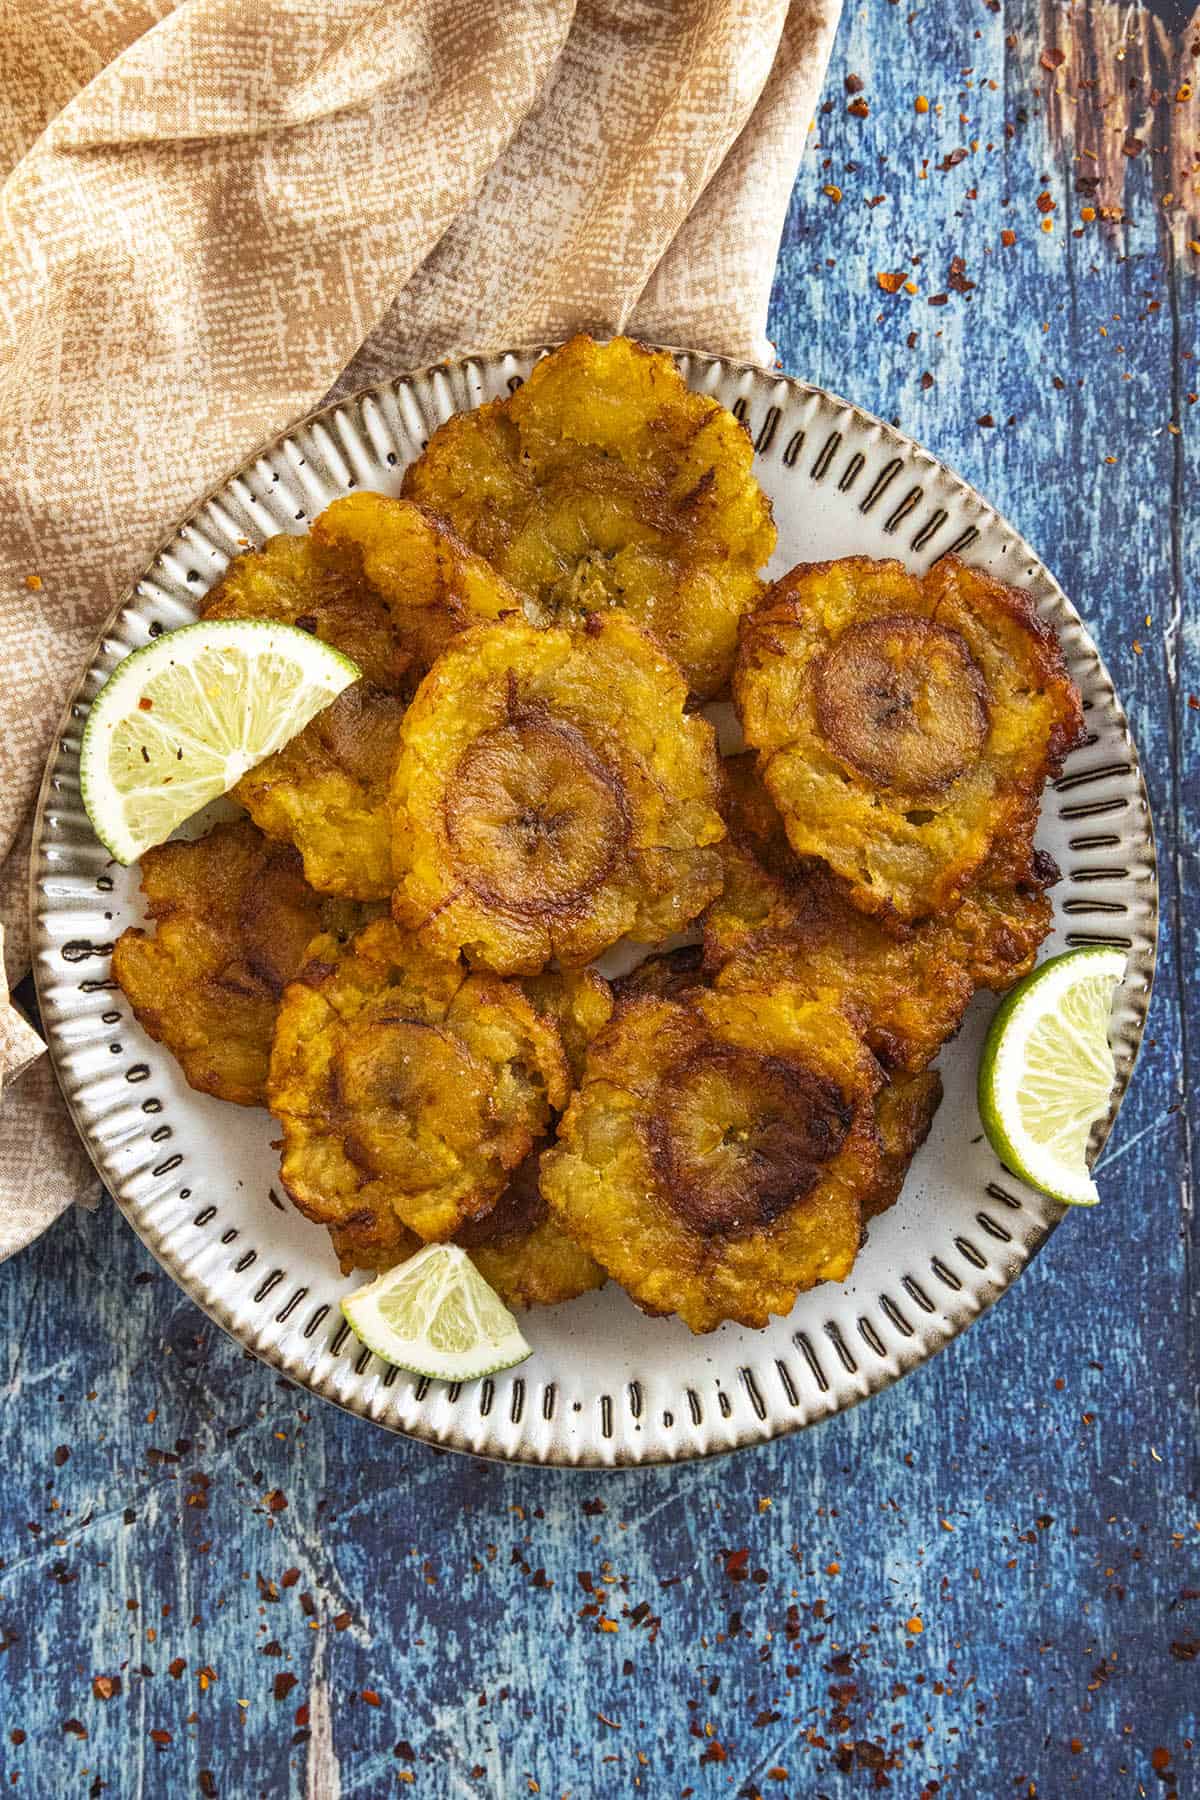 Tostones on a plate with lime wedges, ready to eat